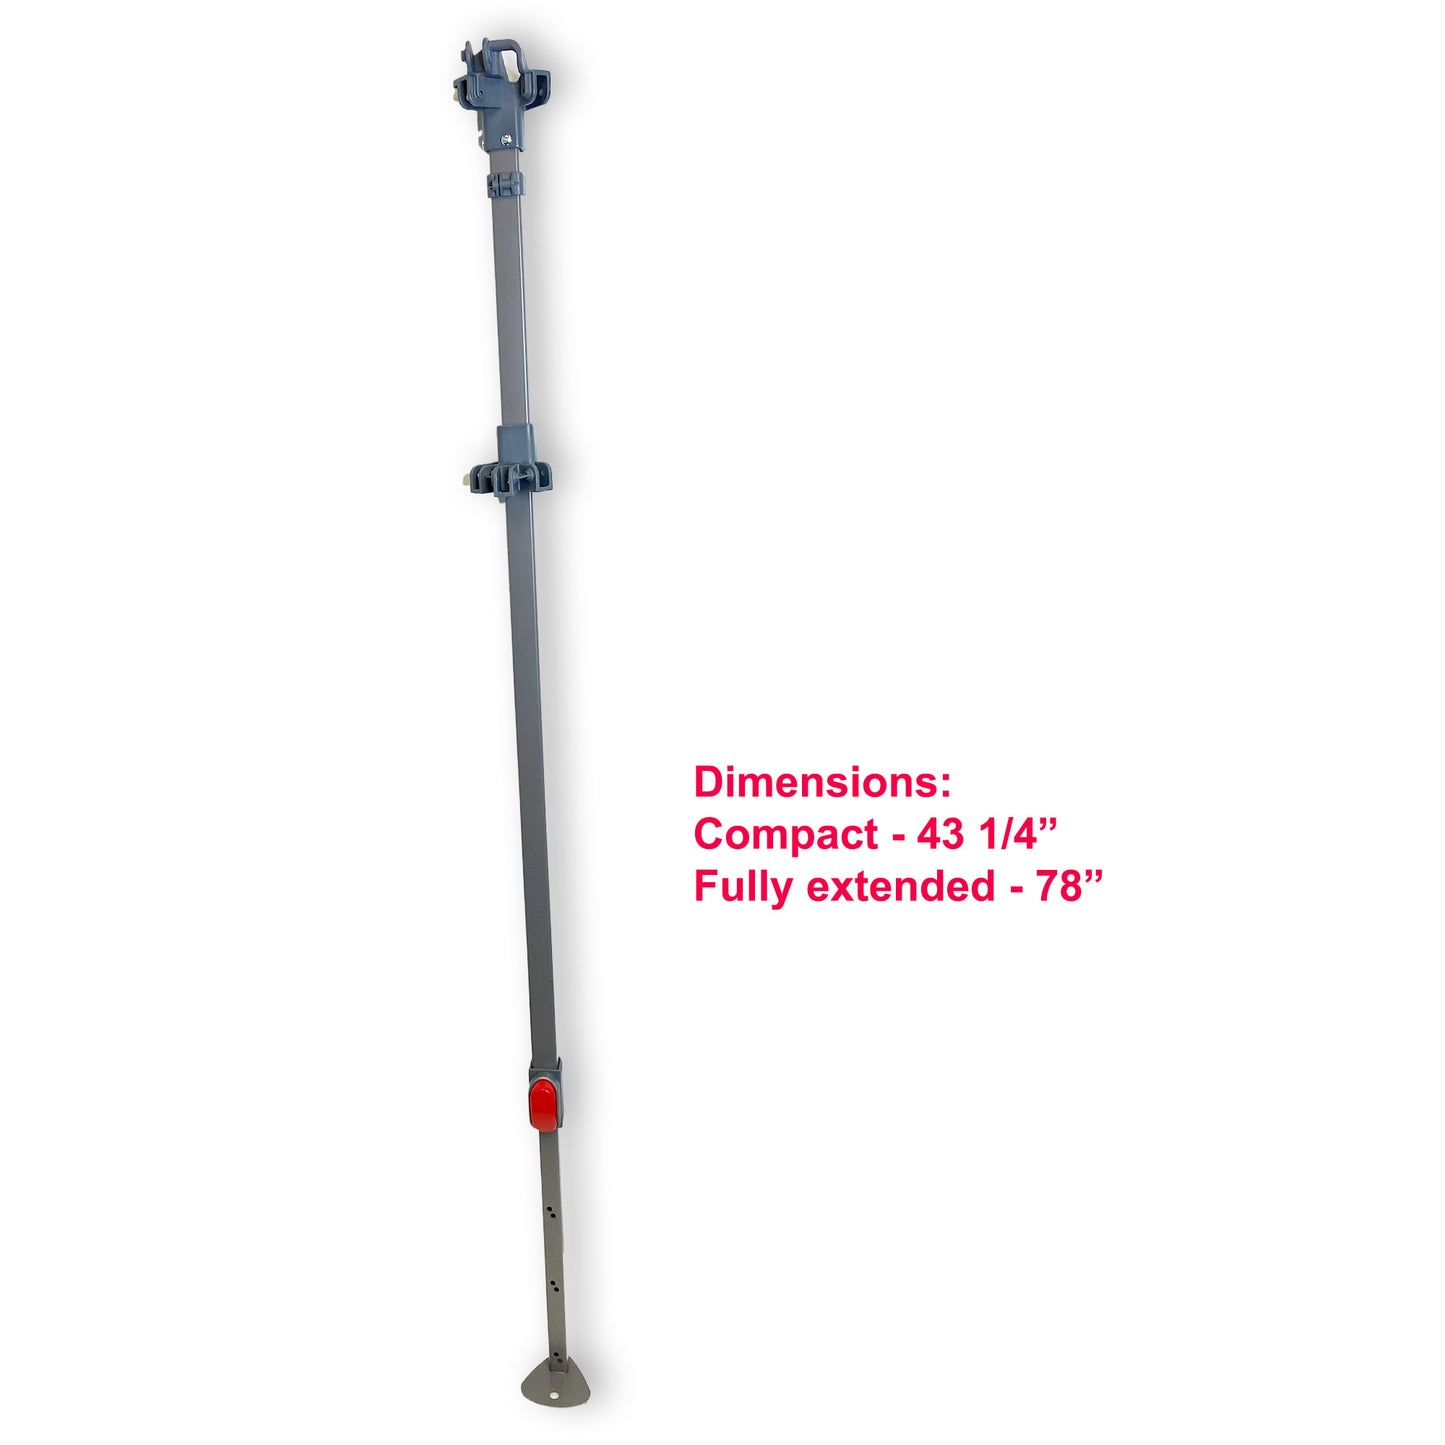 This image shows a replacement telescoping leg for a Coleman 10x10 Oasis Canopy. It details the dimensions of the leg when it is compacted and when it is fully extended. The dimensions given are "Compact - 43 1/4" and "Fully extended - 78". This information is particularly useful for customers looking to replace a part of their Coleman canopy, ensuring they get the correct size for their model.